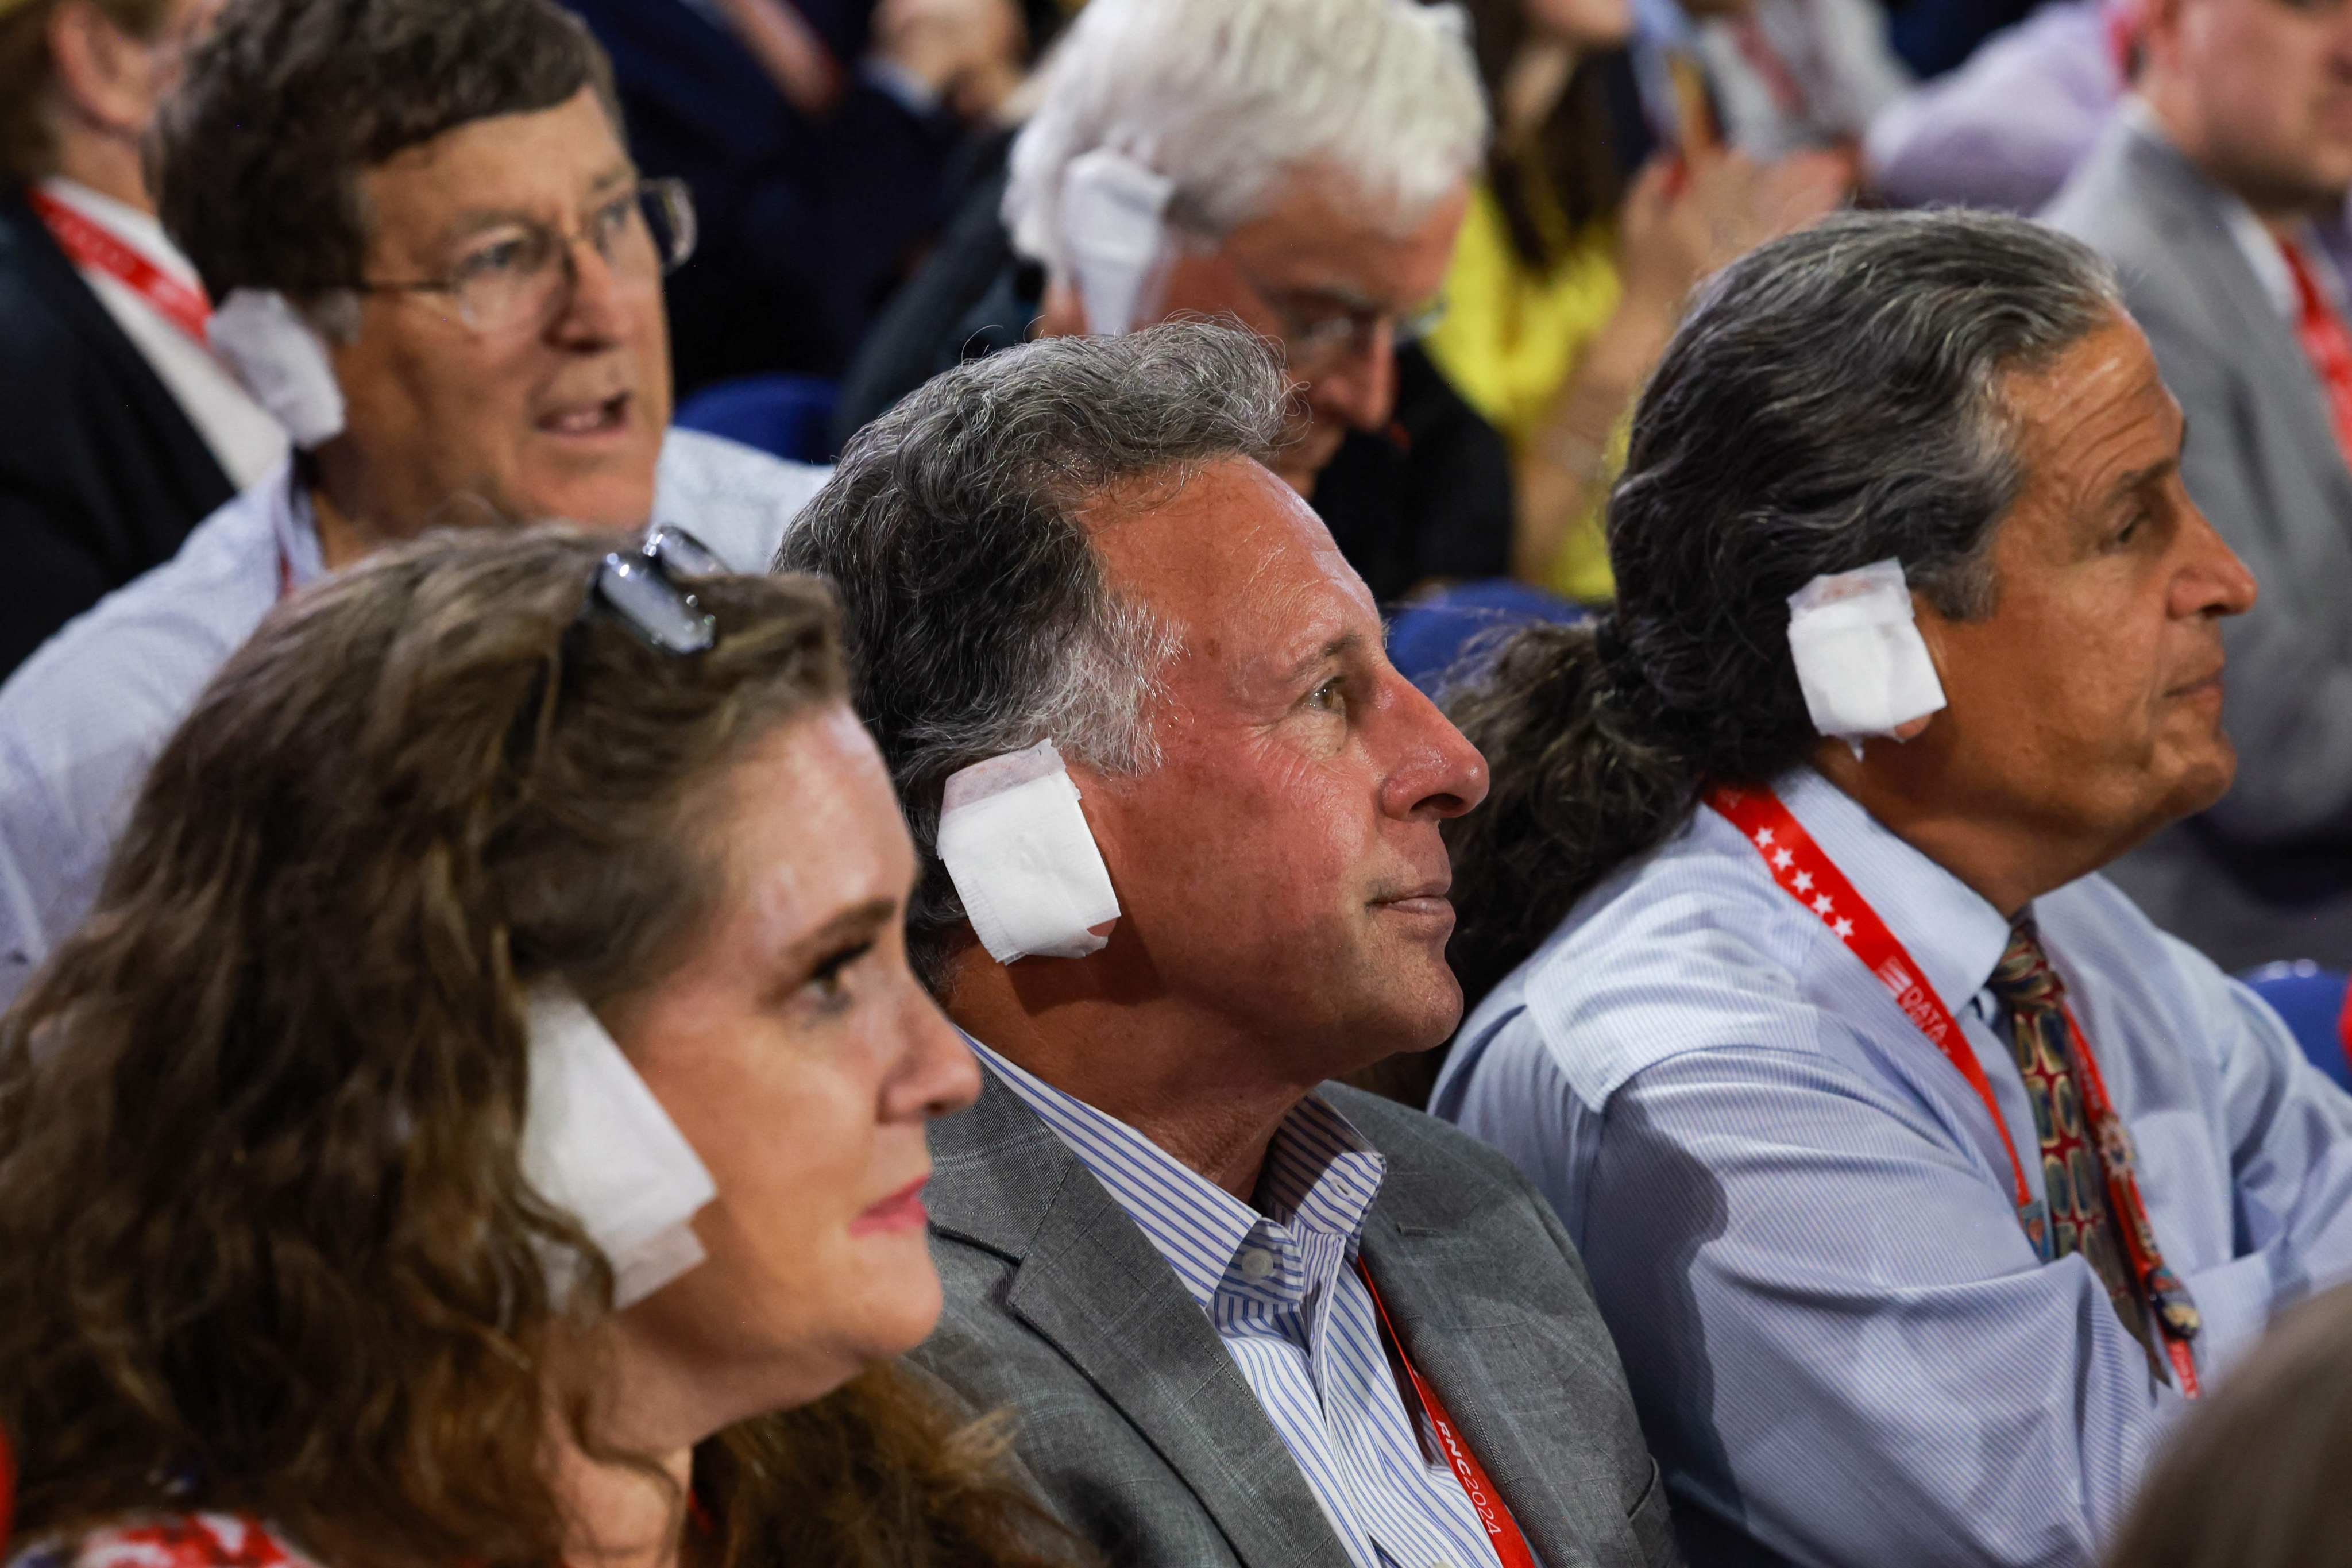 People wear “bandages” on their ears as they watch on the third day of the Republican National Convention on July 17. Photo: AFP